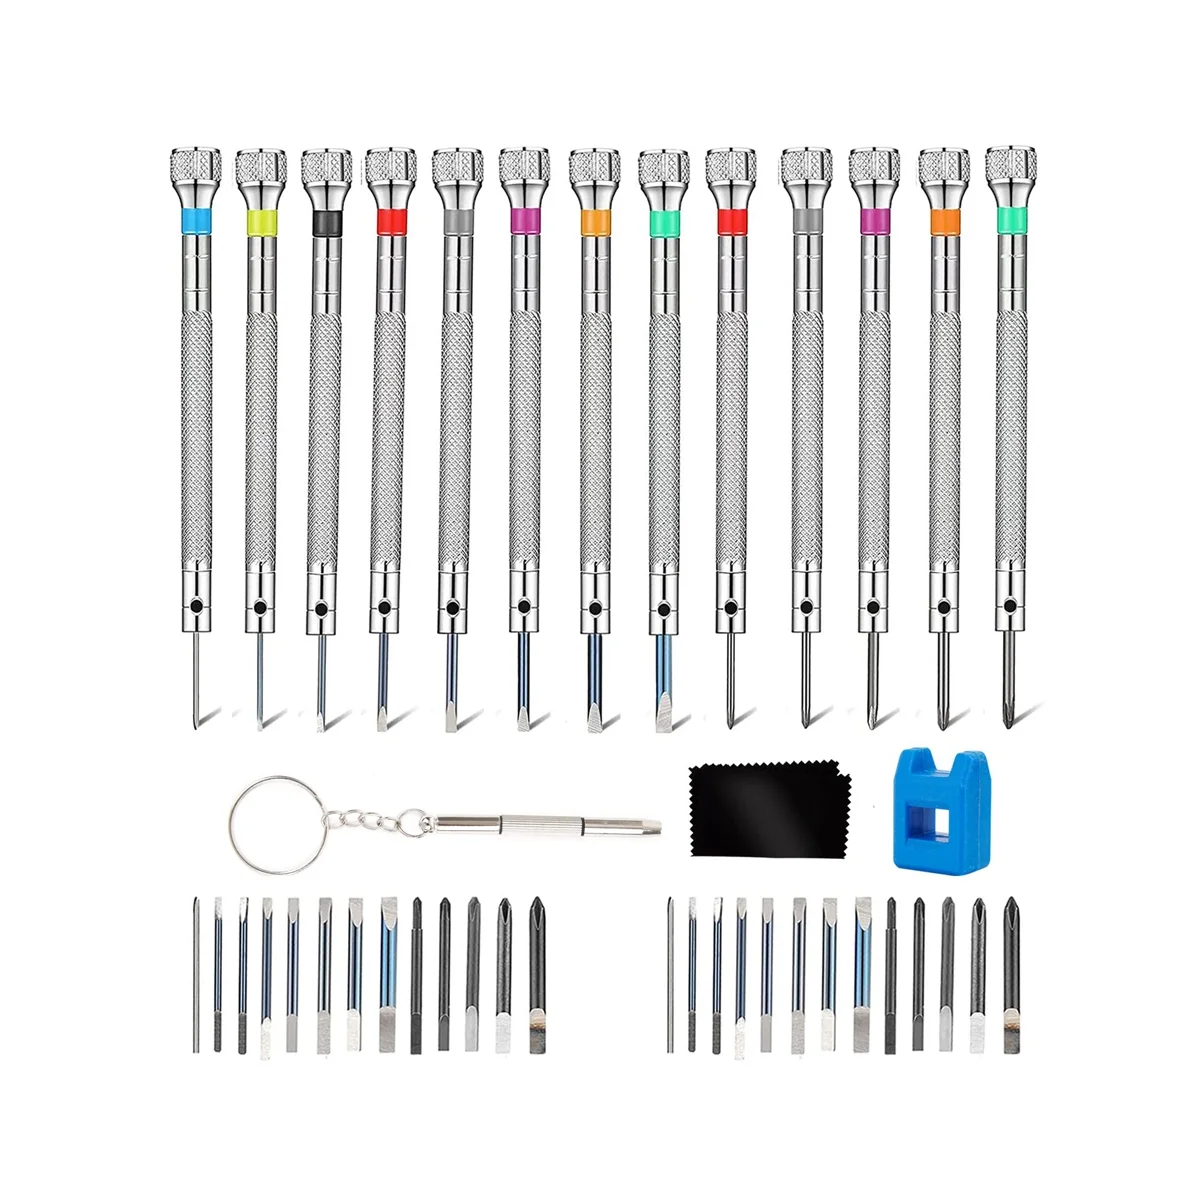 

13 Pieces Watch Screwdriver Set-Jewelers Screwdriver Set -with 26 Extra Pieces of Screwdriver Bits Tools for Watchmakers